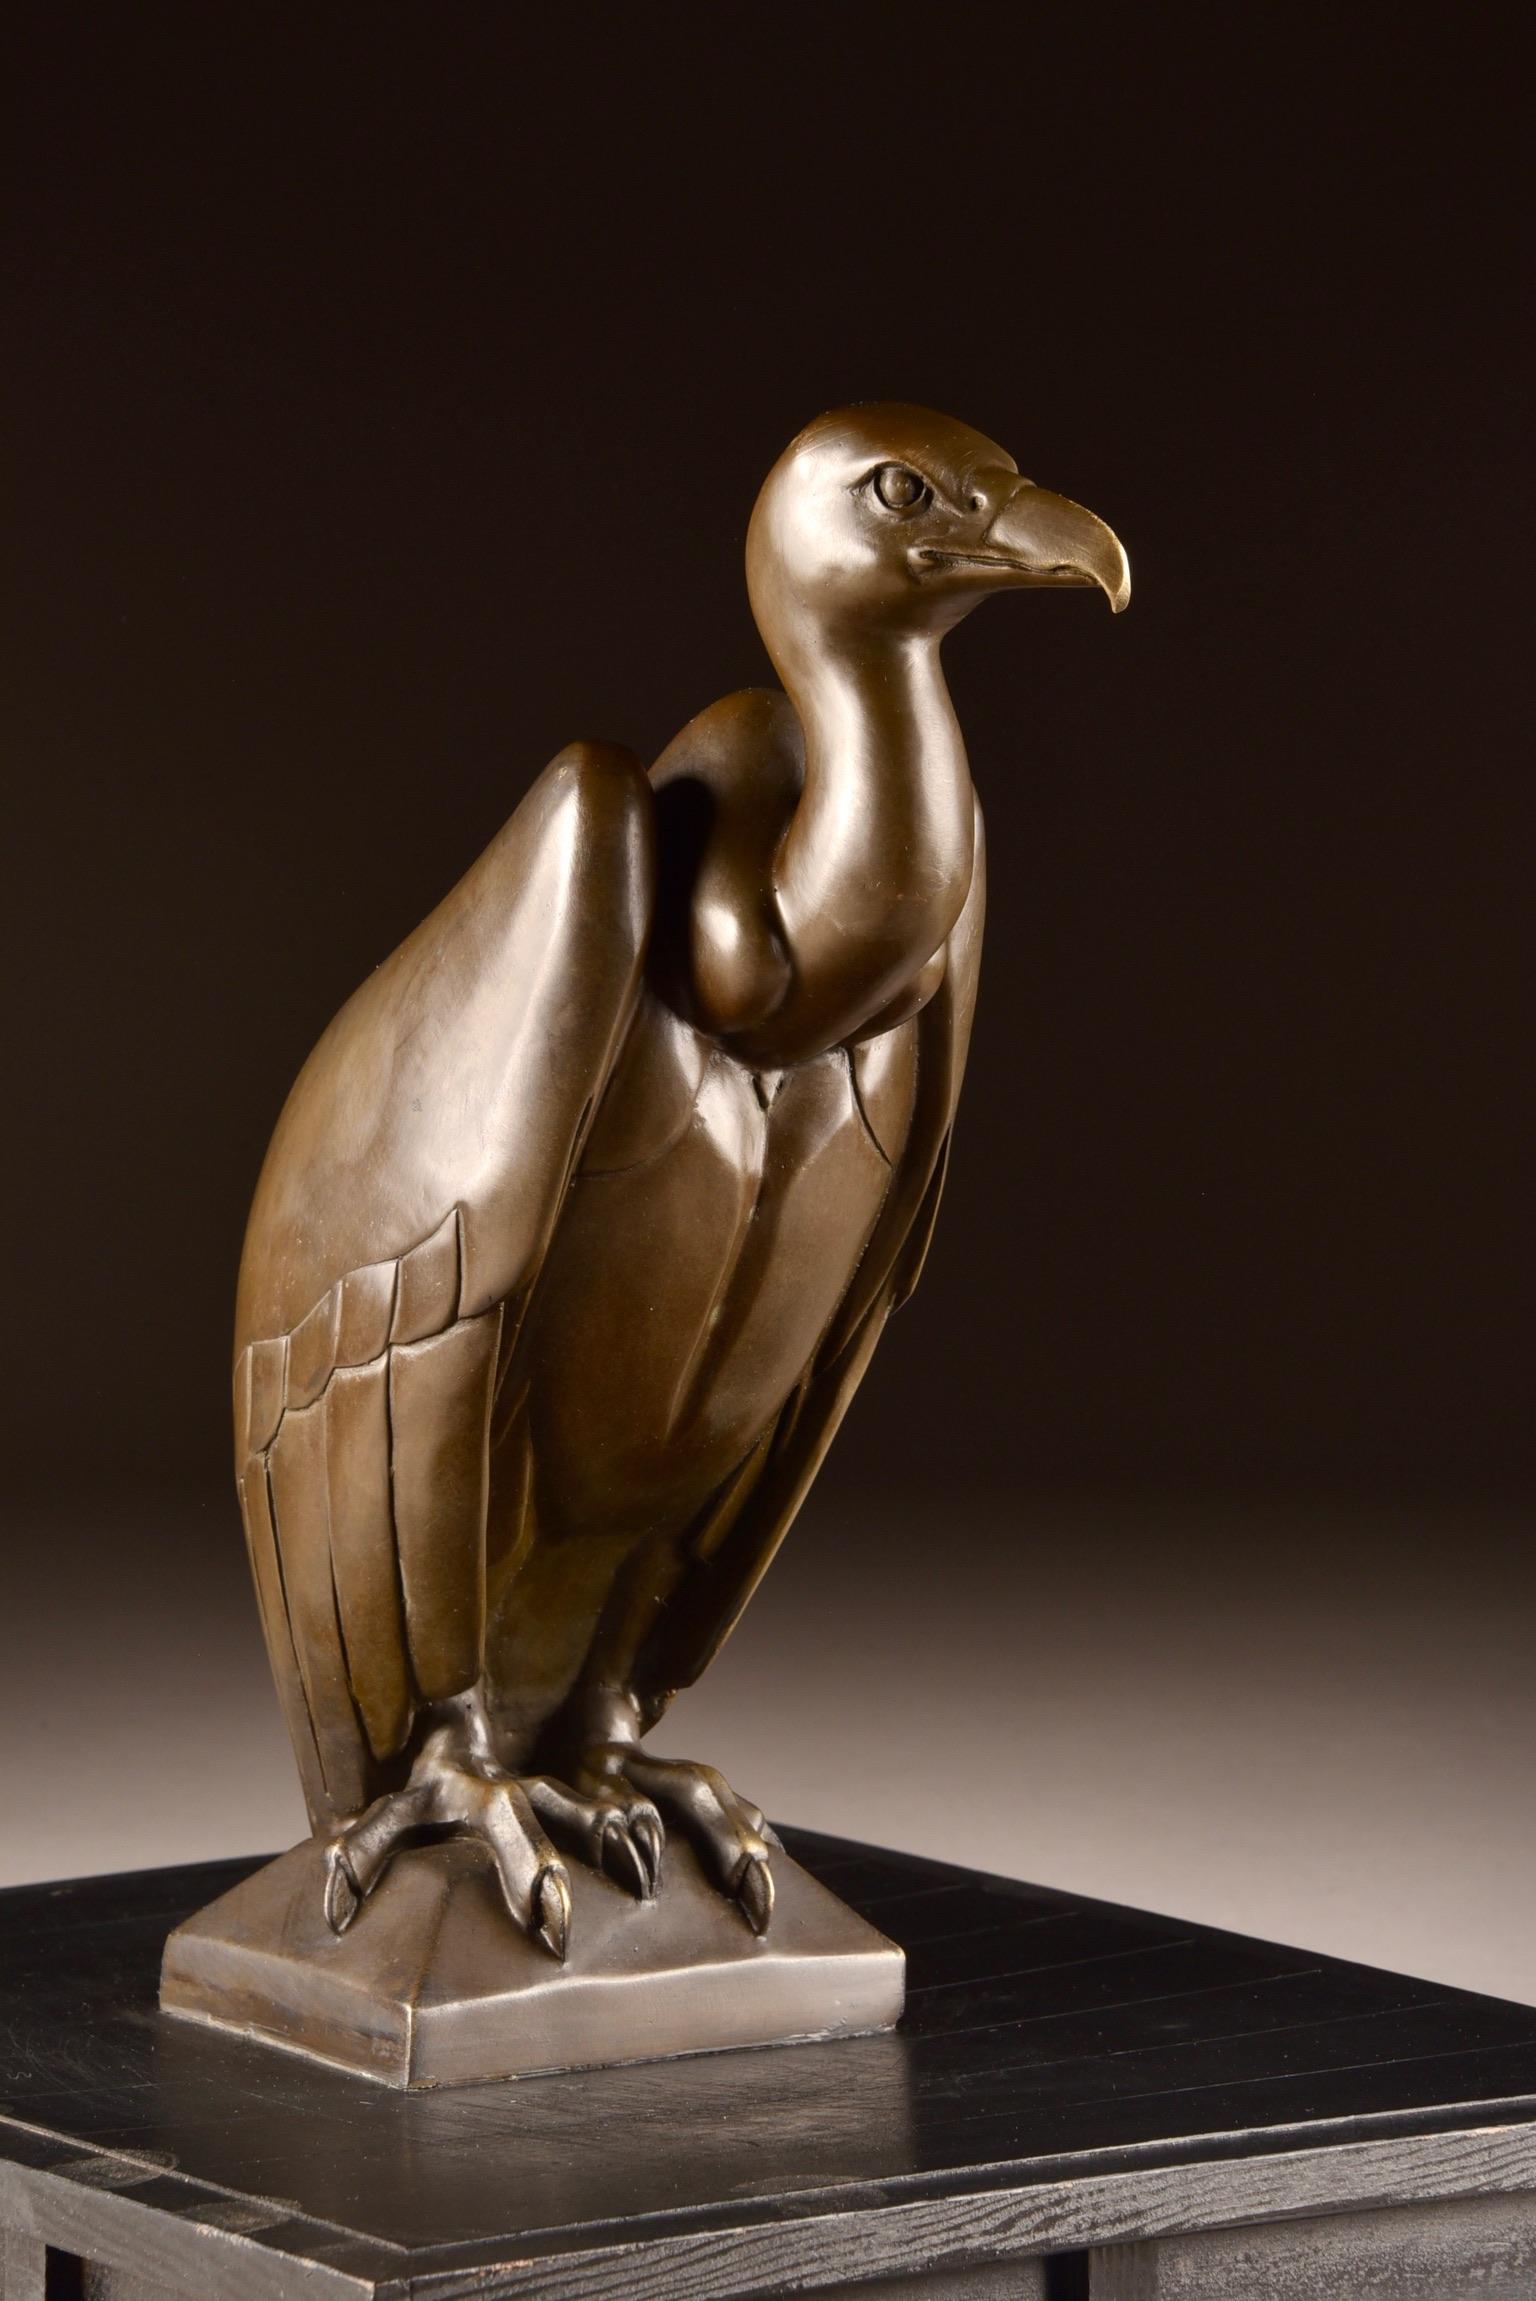 A bronze sculpture of a eagle in Art Deco style. A beautiful statue for the lovers and followers of Art Deco style.